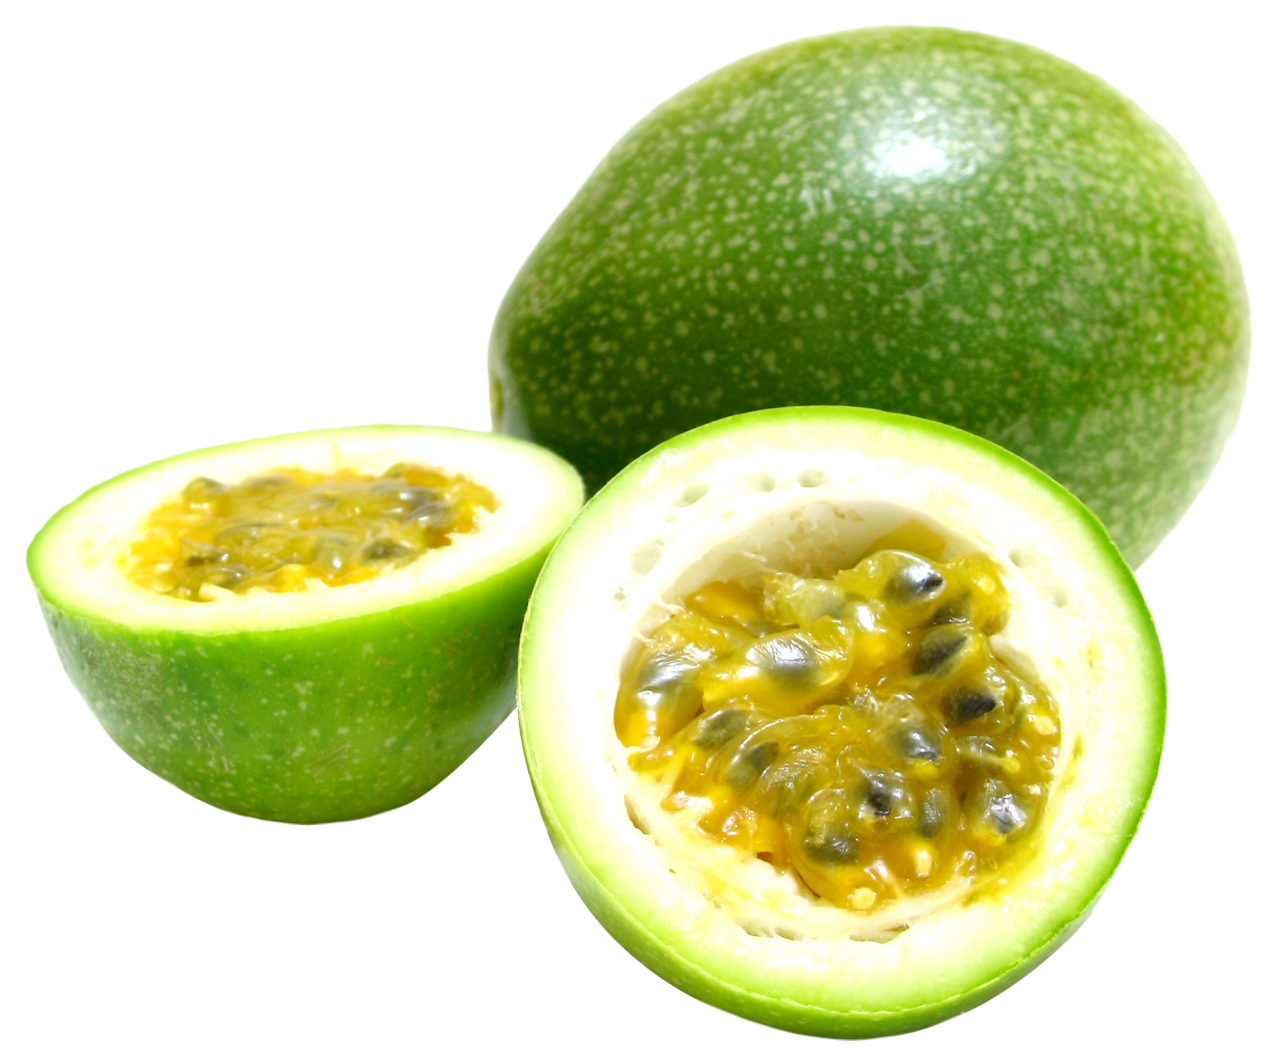 Passion Fruit PNG Image